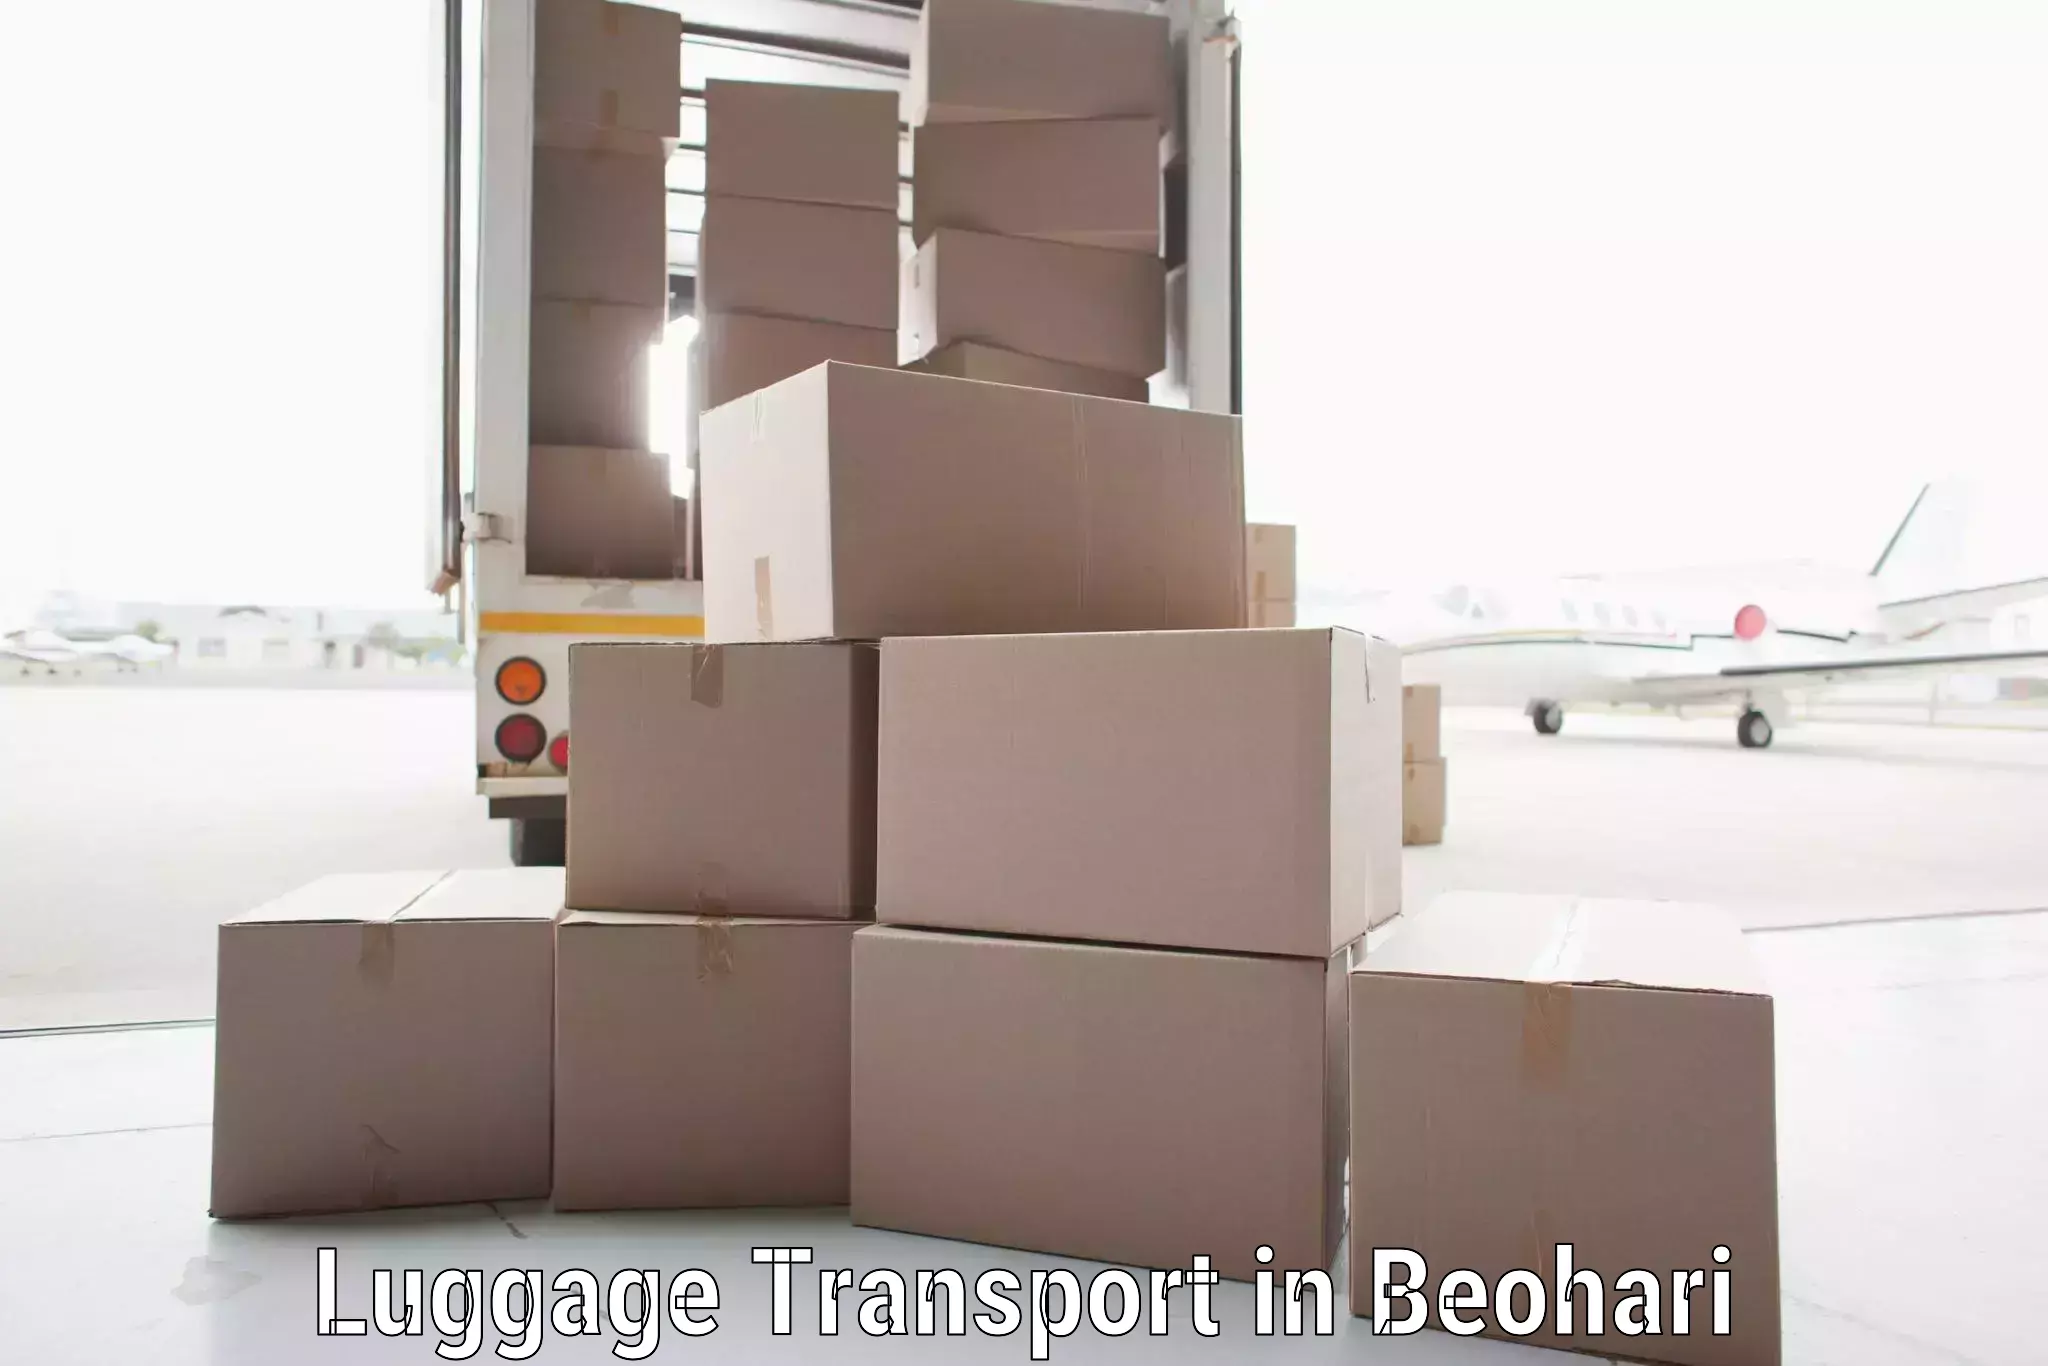 Baggage delivery management in Beohari